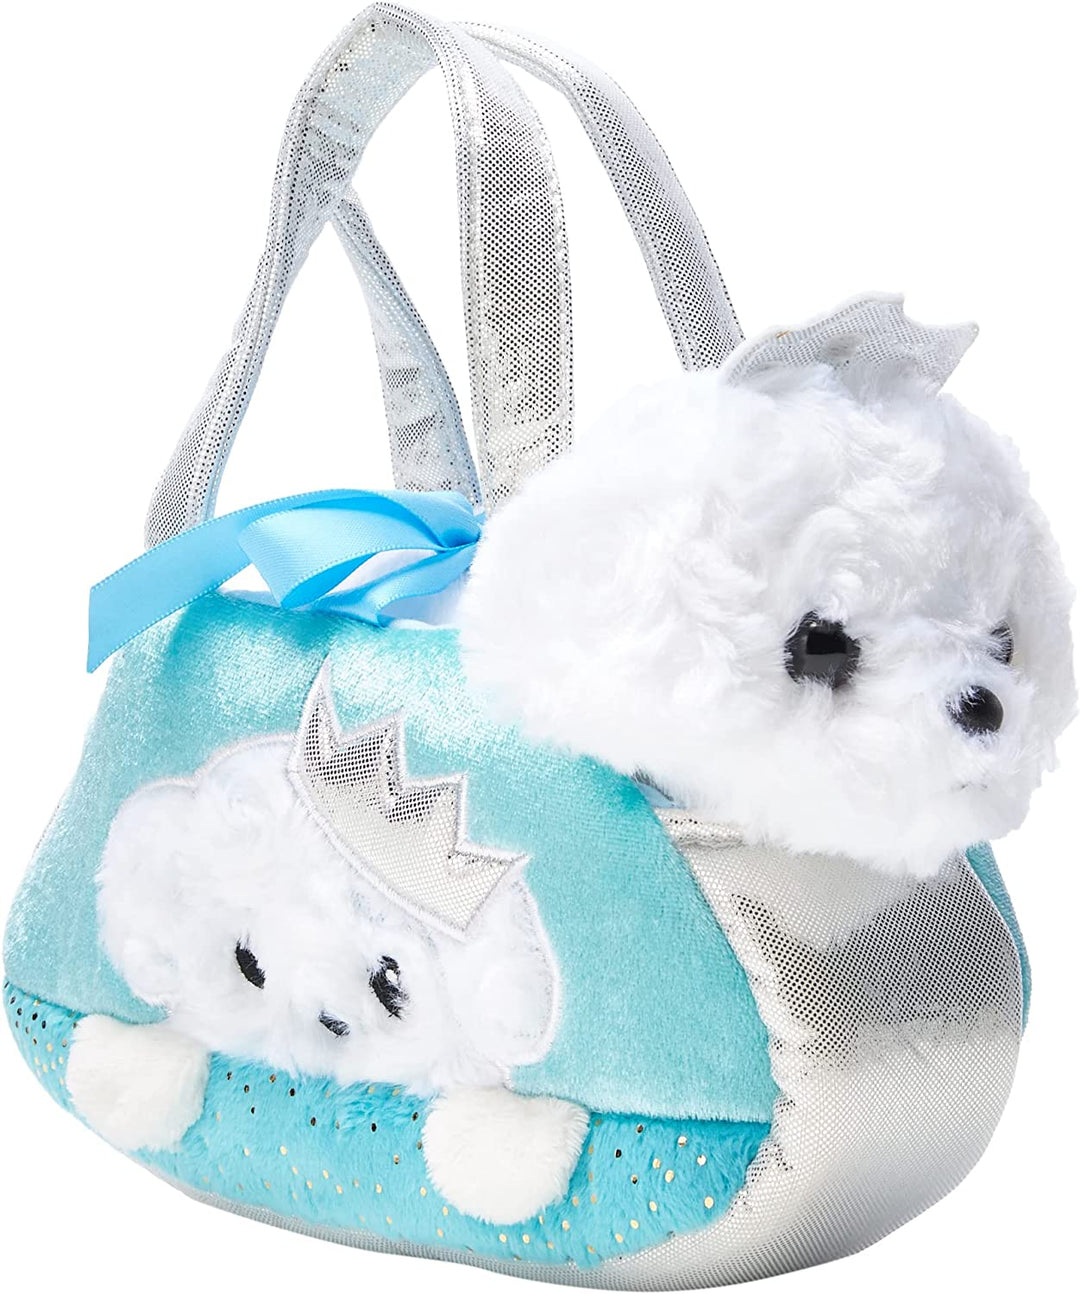 Aurora, 60847, Fancy Pal, Peek-a-Boo Princess Puppy, 8In, Soft Toy, White and Blue